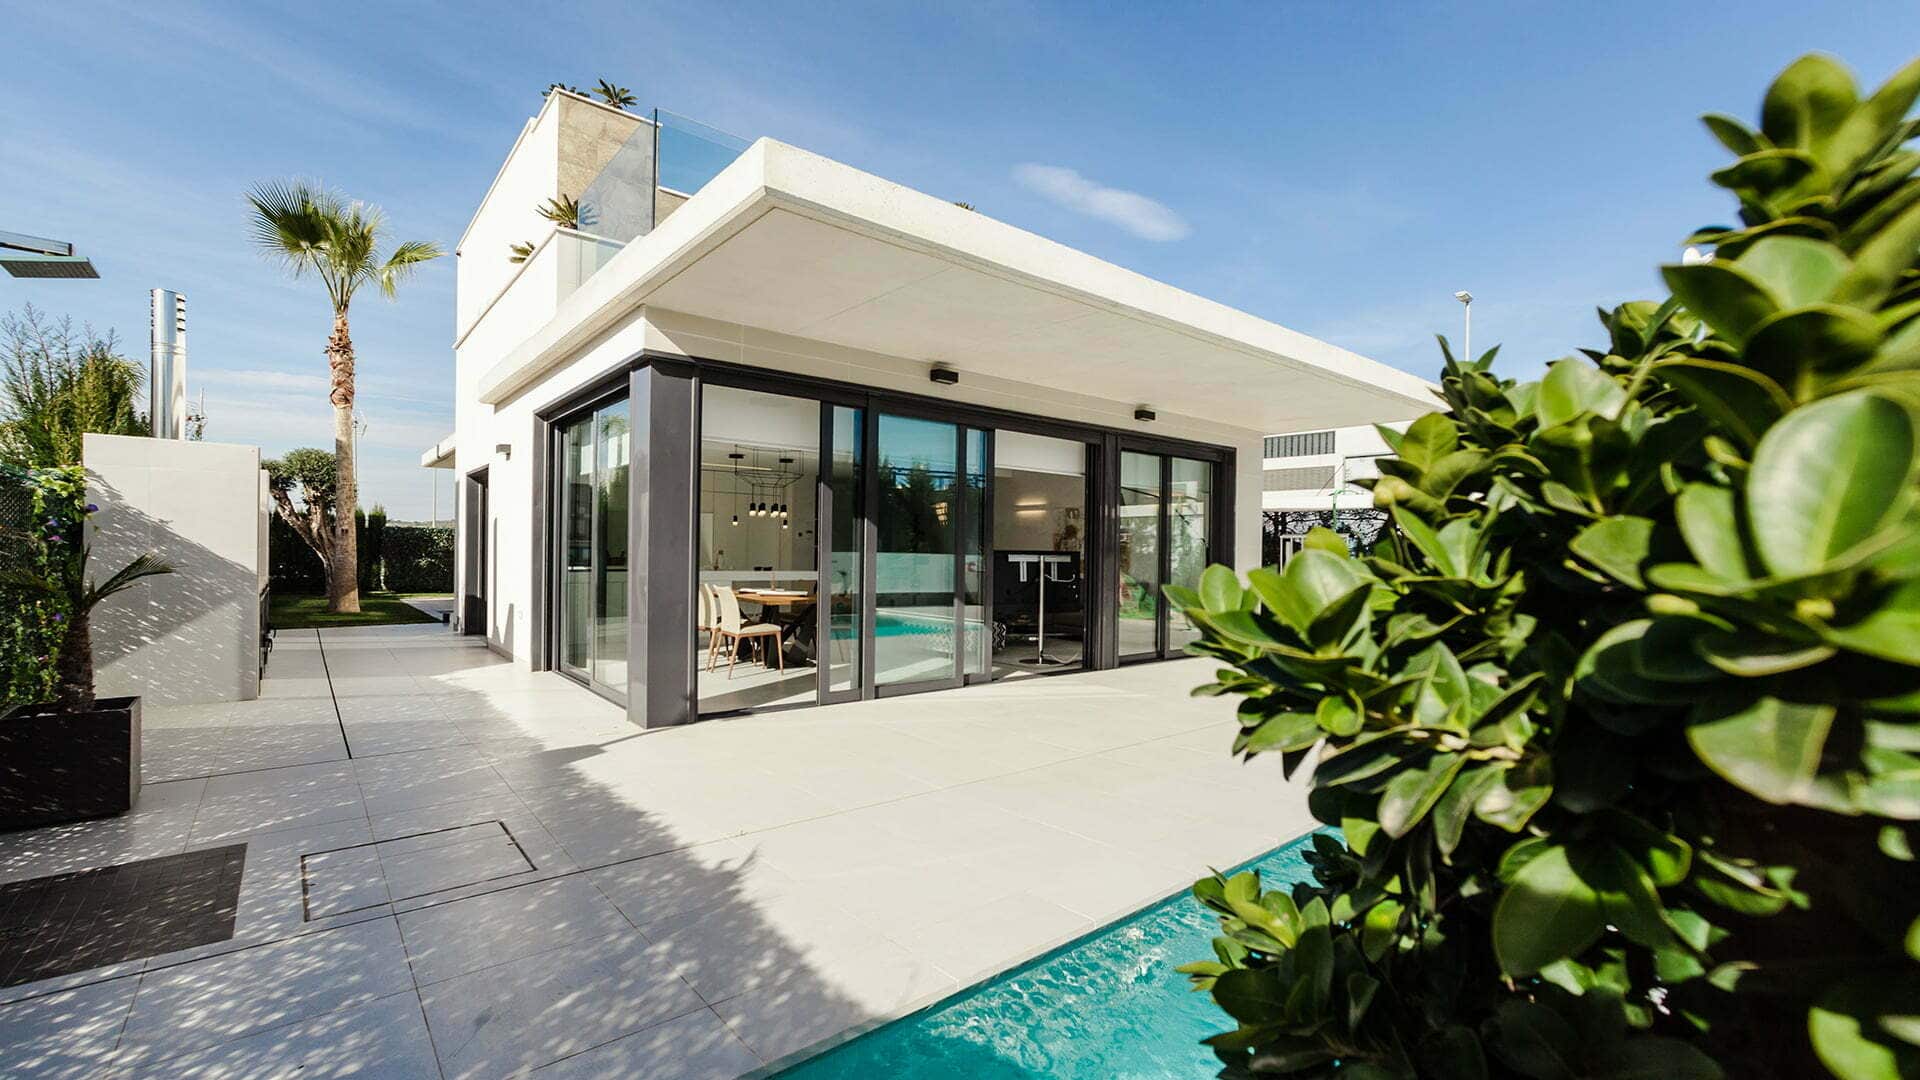 Modern property with a pool and a stunning view. The open concept design features a large living area, kitchen, and floor-to-ceiling windows. Perfect for those seeking a luxurious lifestyle.